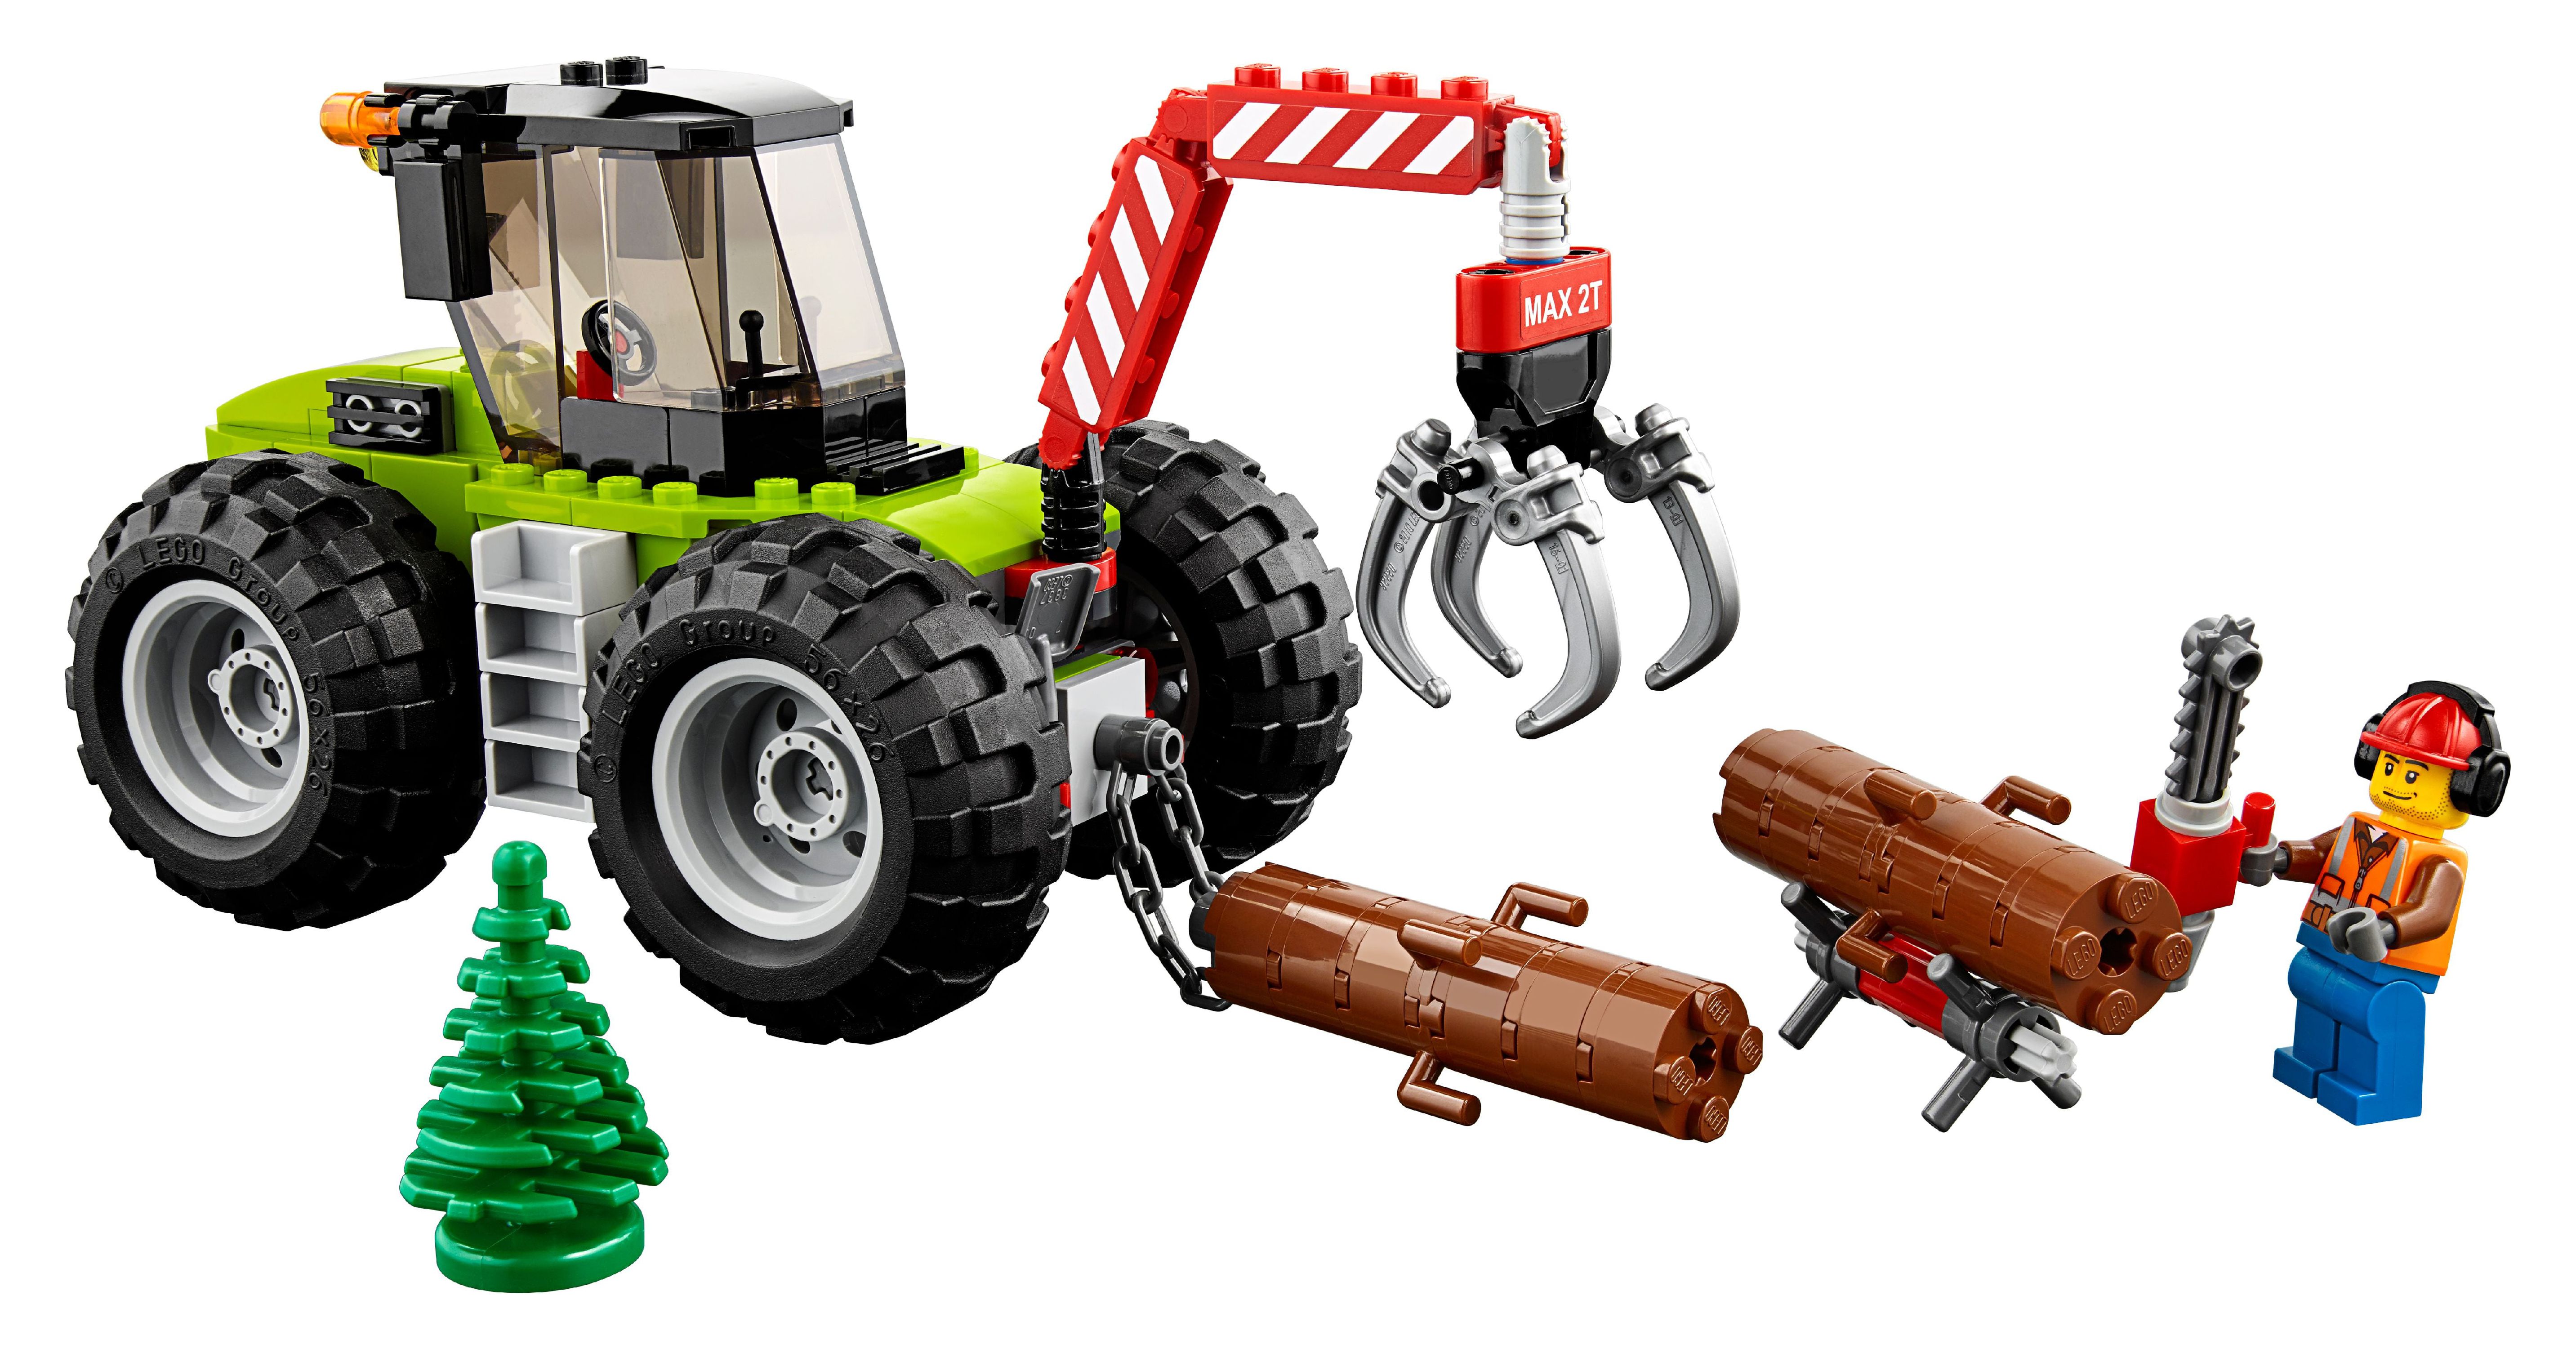 LEGO City Great Vehicles Forest Tractor 60181 - image 1 of 5